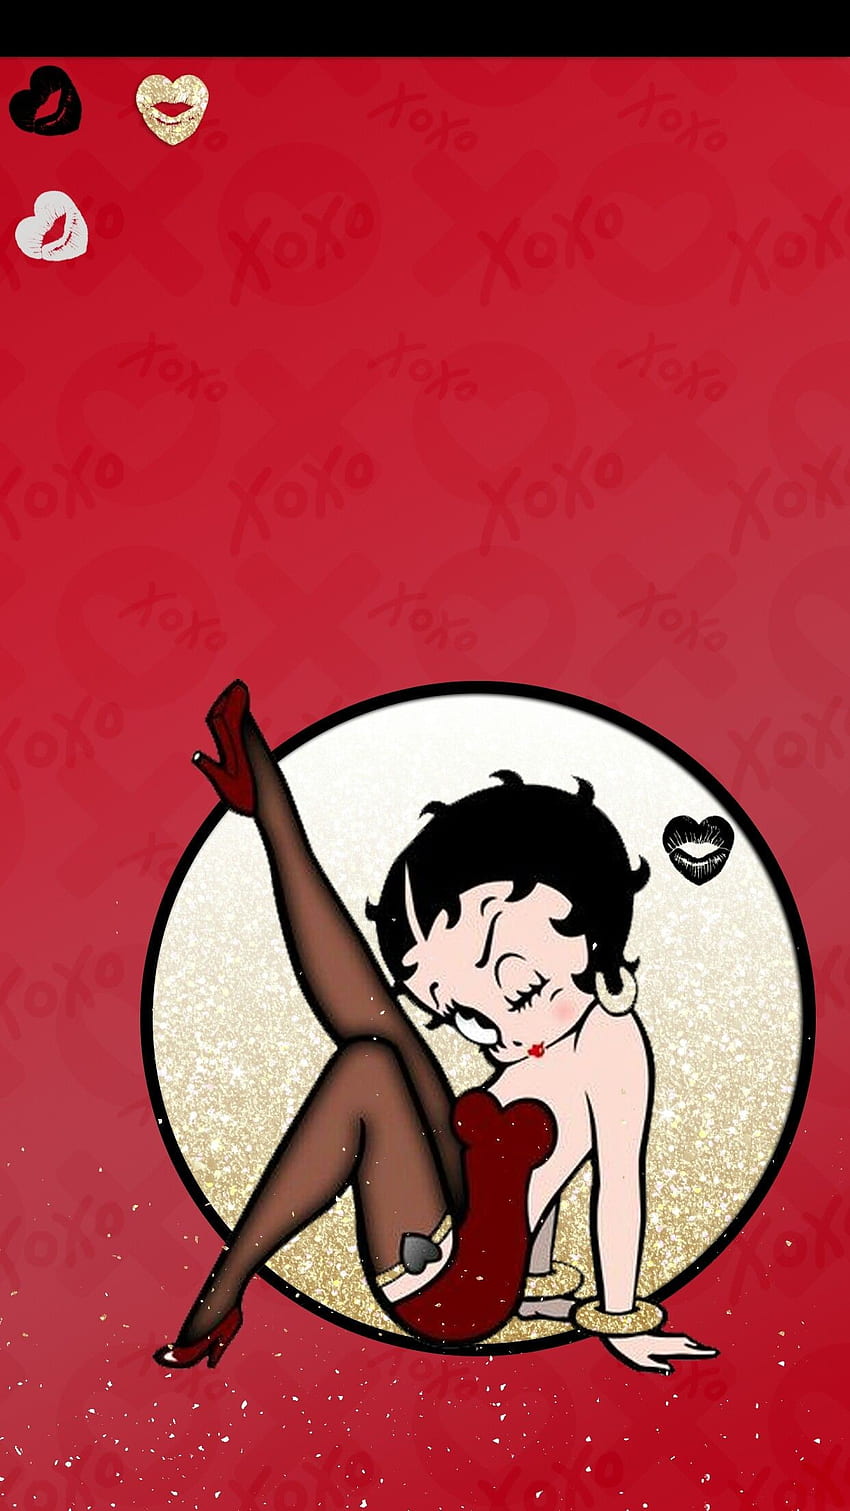 Black Betty Boop Stickers for Sale  Redbubble